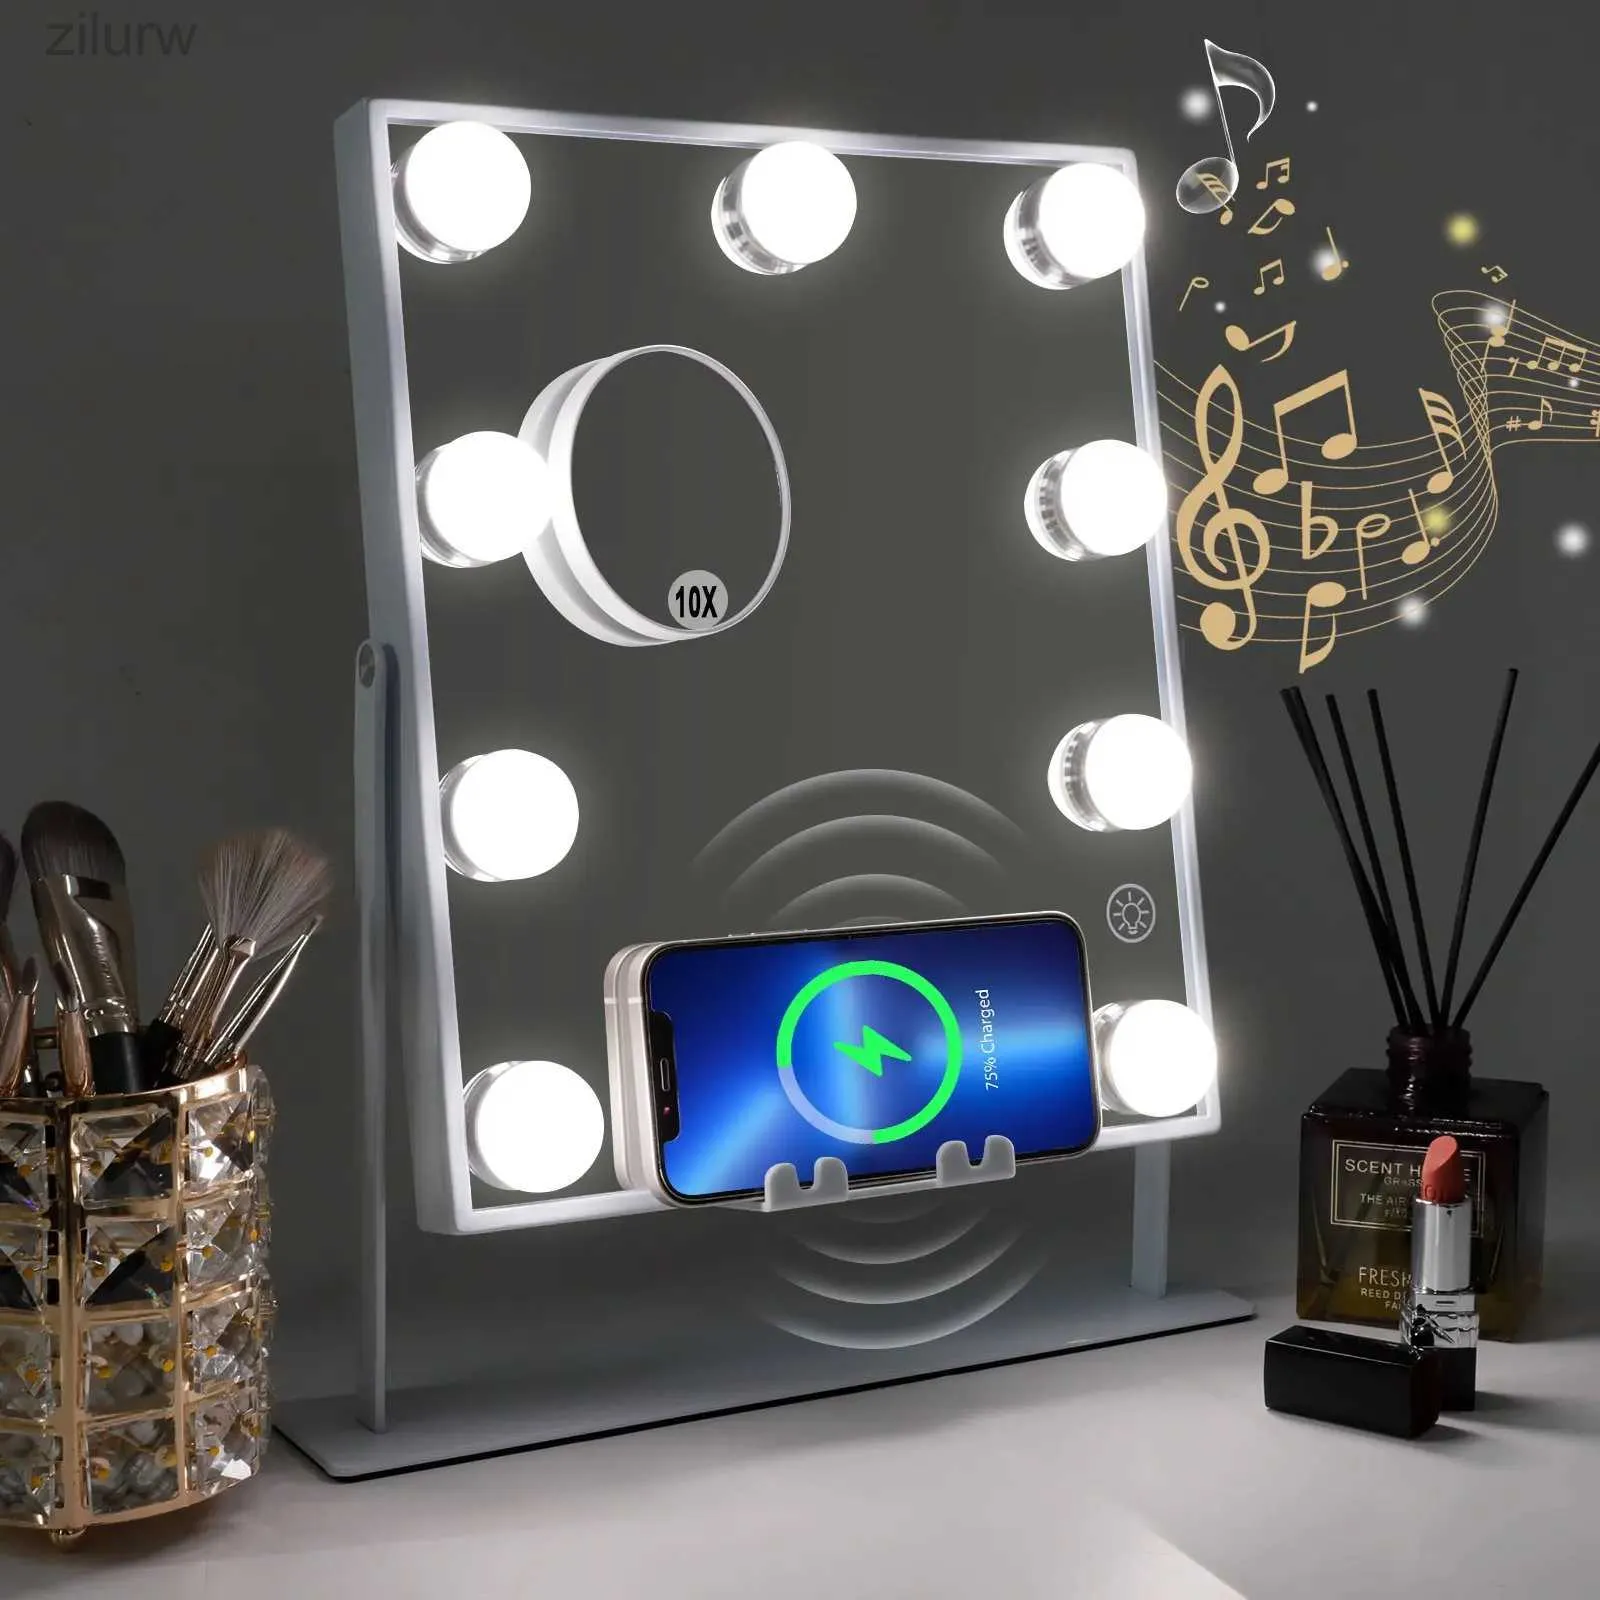 Compact Mirrors Luminous vanity mirror with Bluetooth and wireless charging makeup light 9 dimmable light bulbs 3 colorful illuminated desktop (Why) d240510